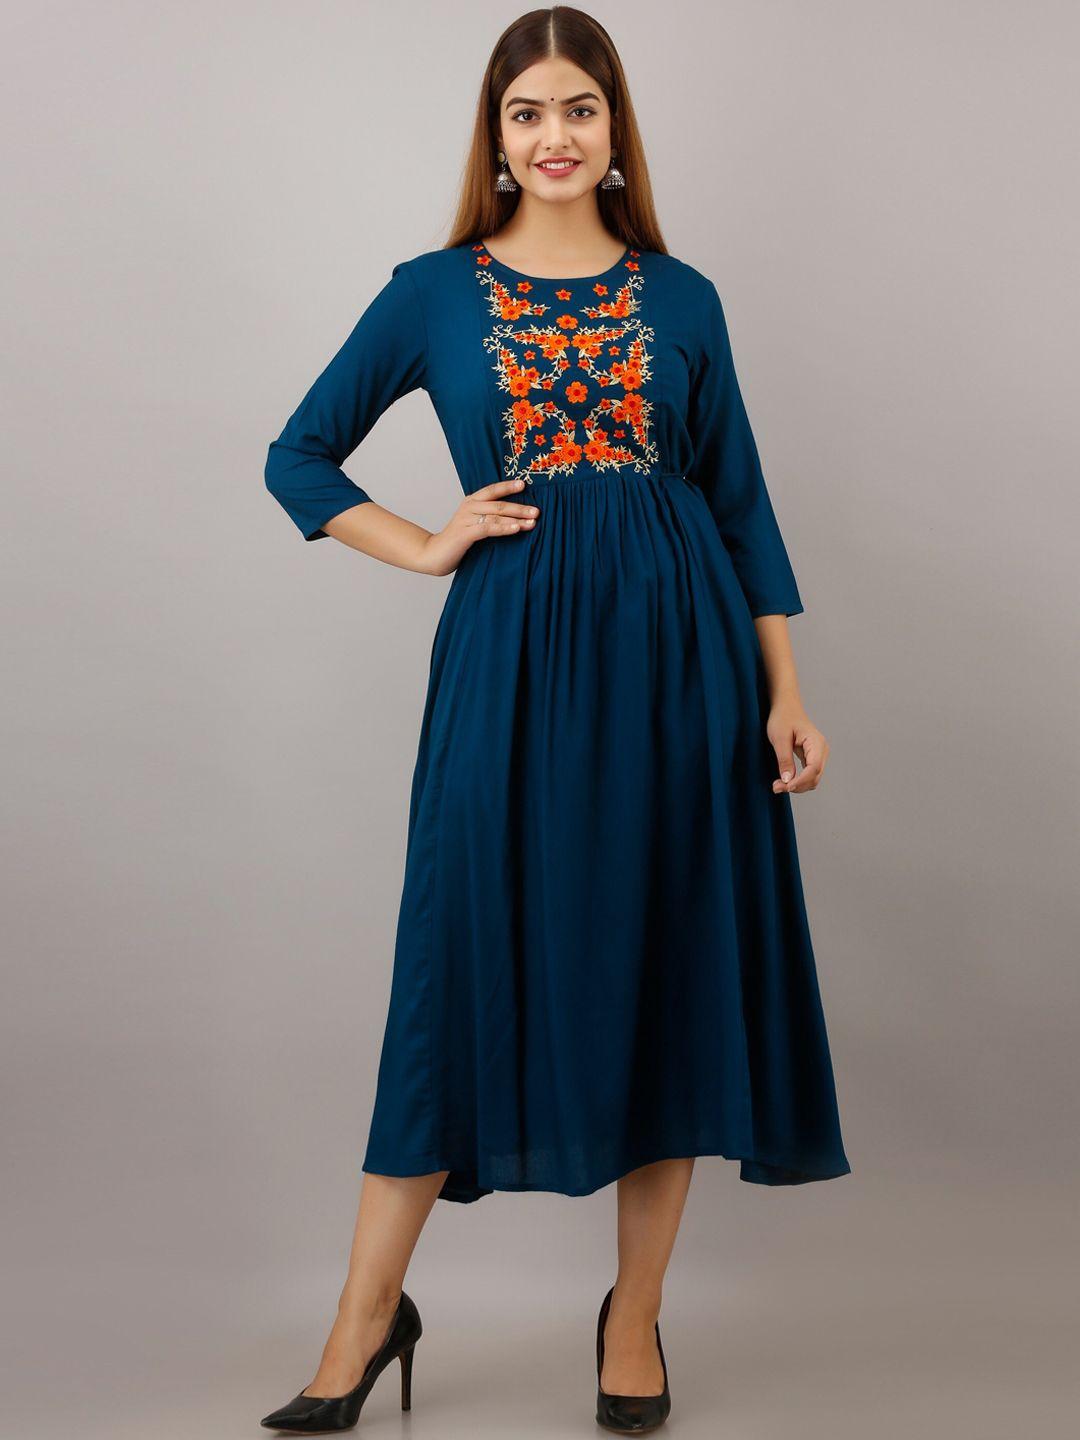 women touch navy blue & orange floral embroidered ethnic midi dress